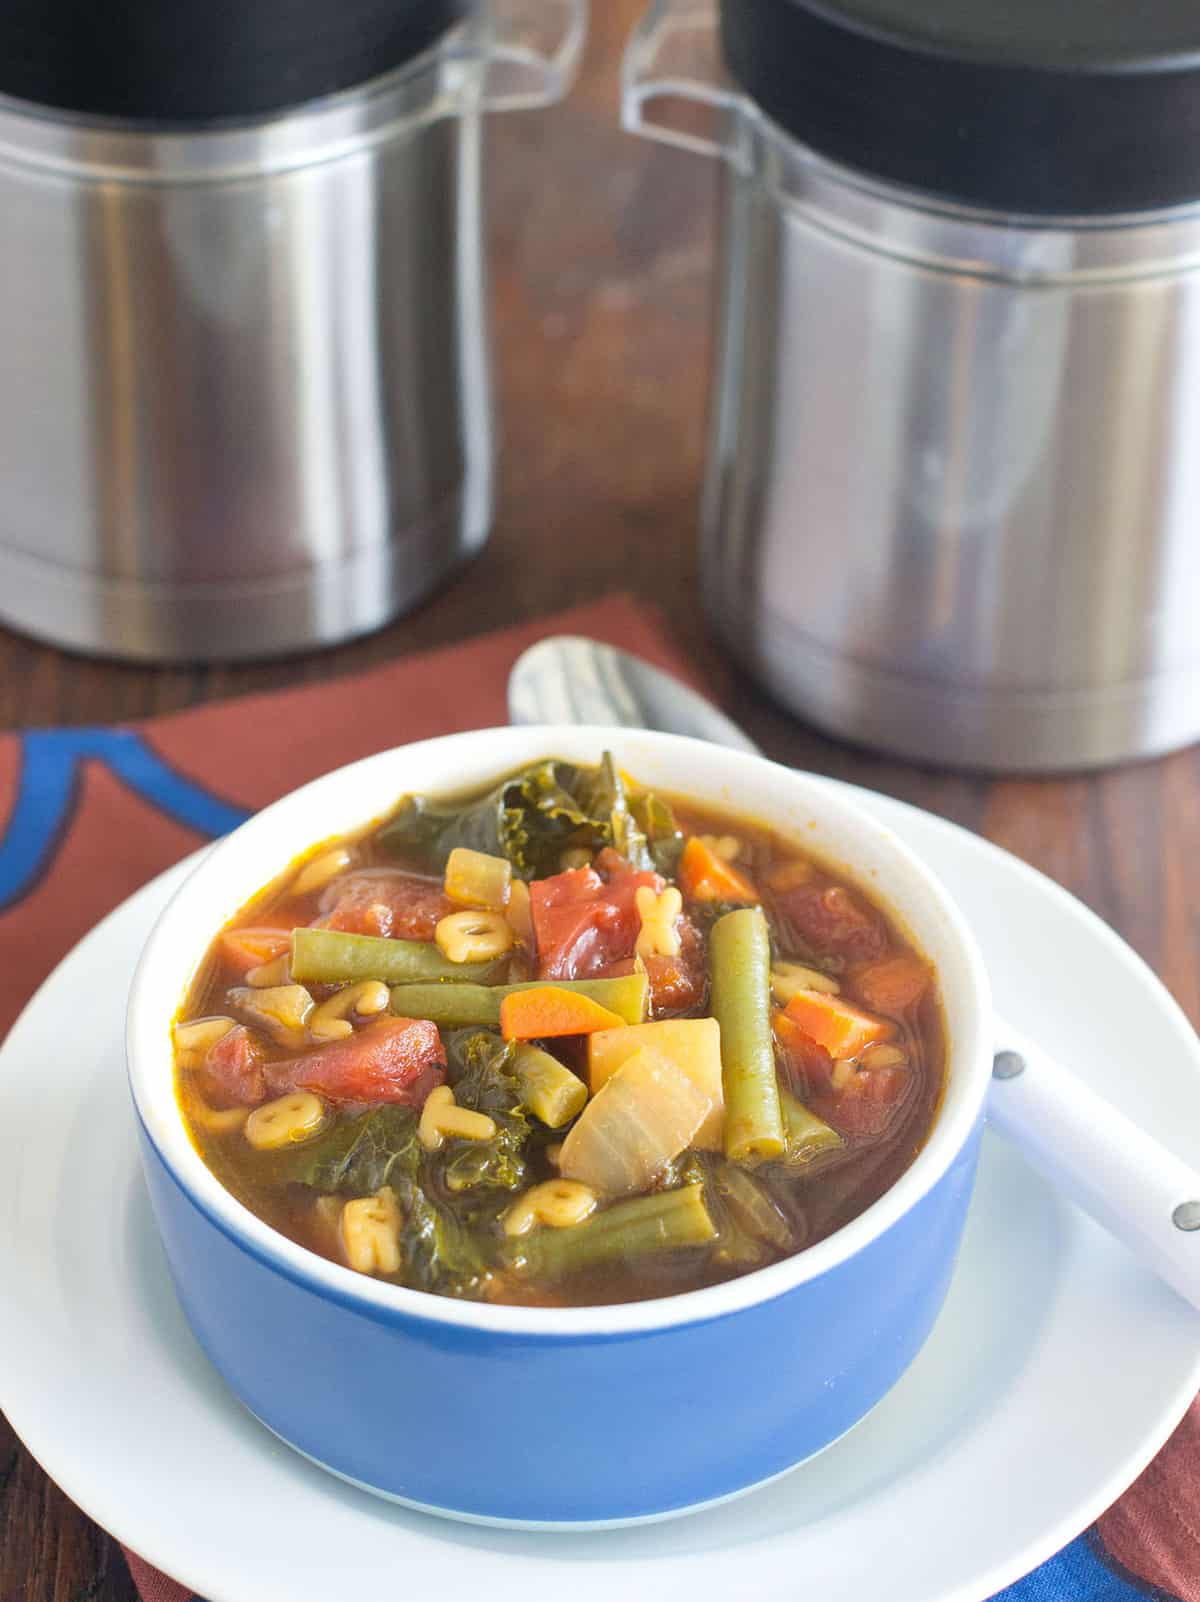 Vegetable soup in blue bowl on white plate with spoon. Two thermos containers shown in background